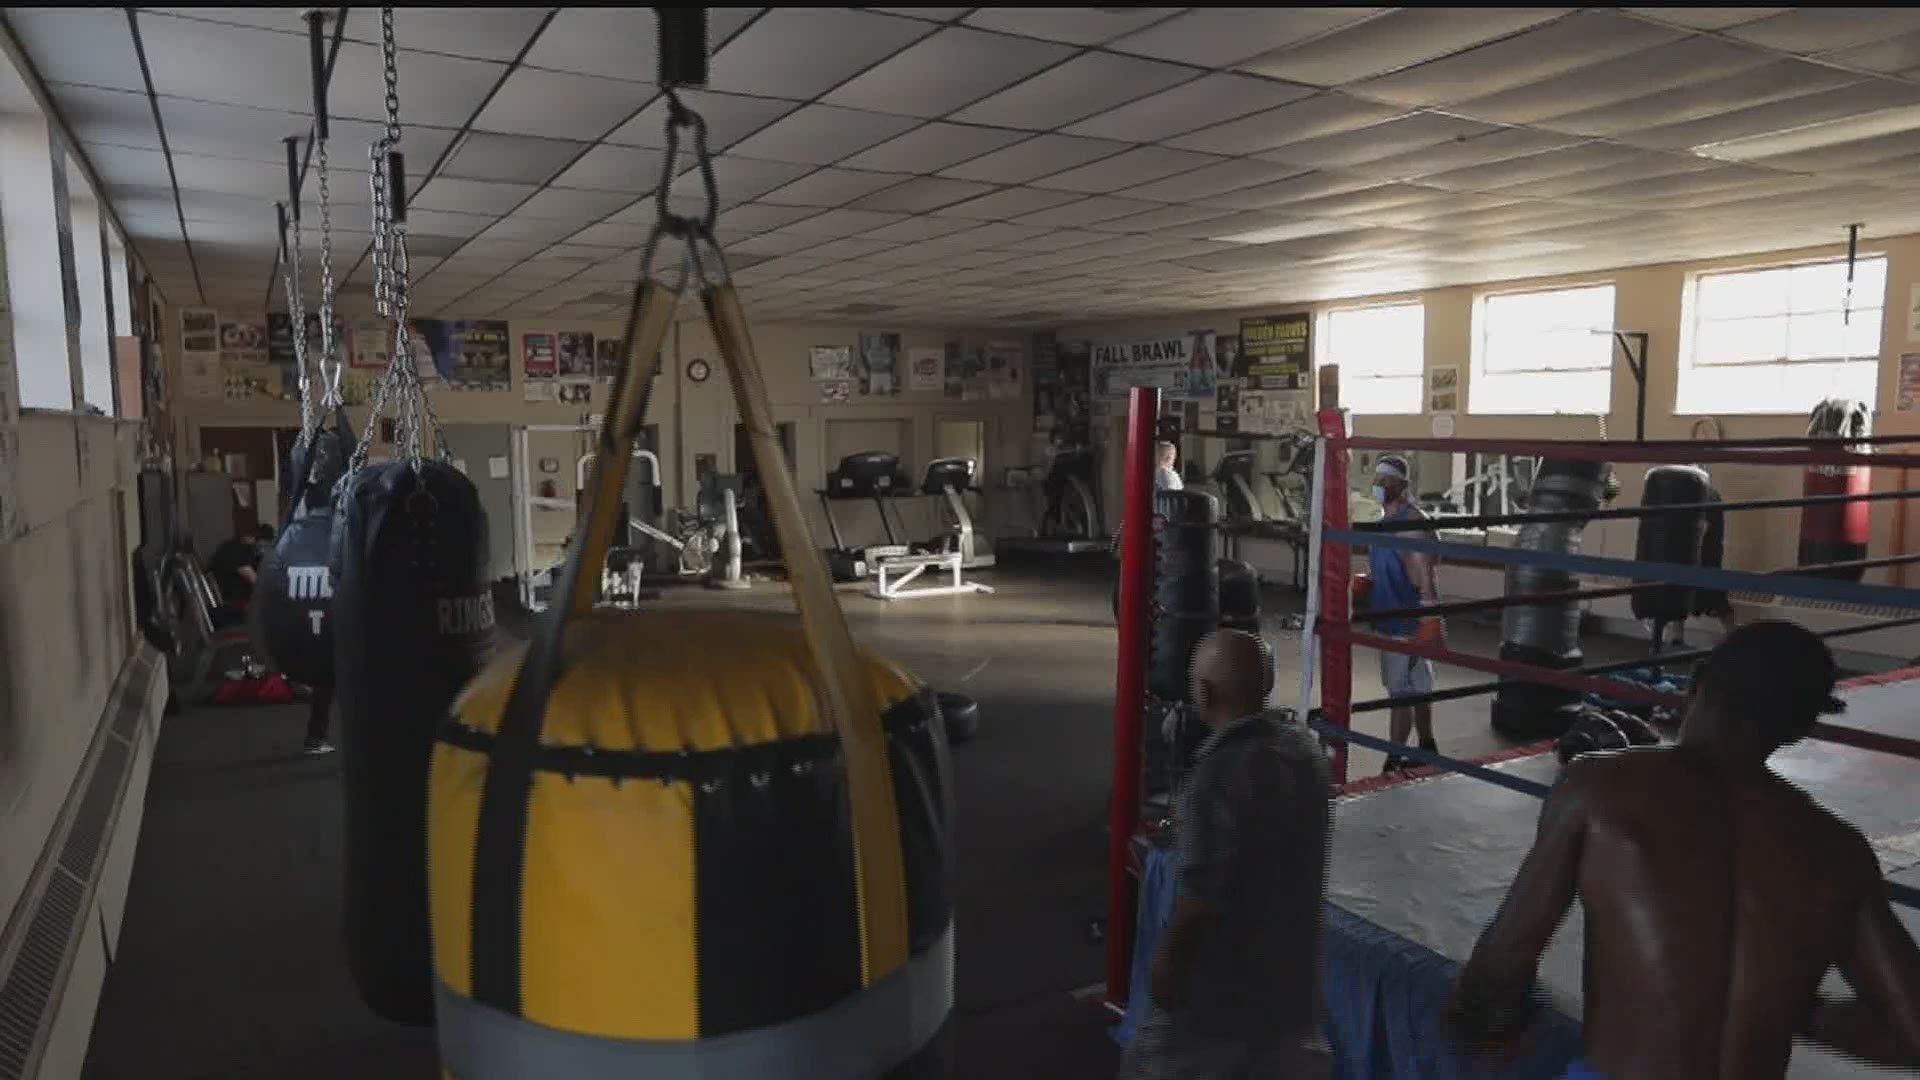 The operator of Lincolnway Sportcenter is trying to raise enough money to buy the building, garnering support from the community the gym has served for 26 years.